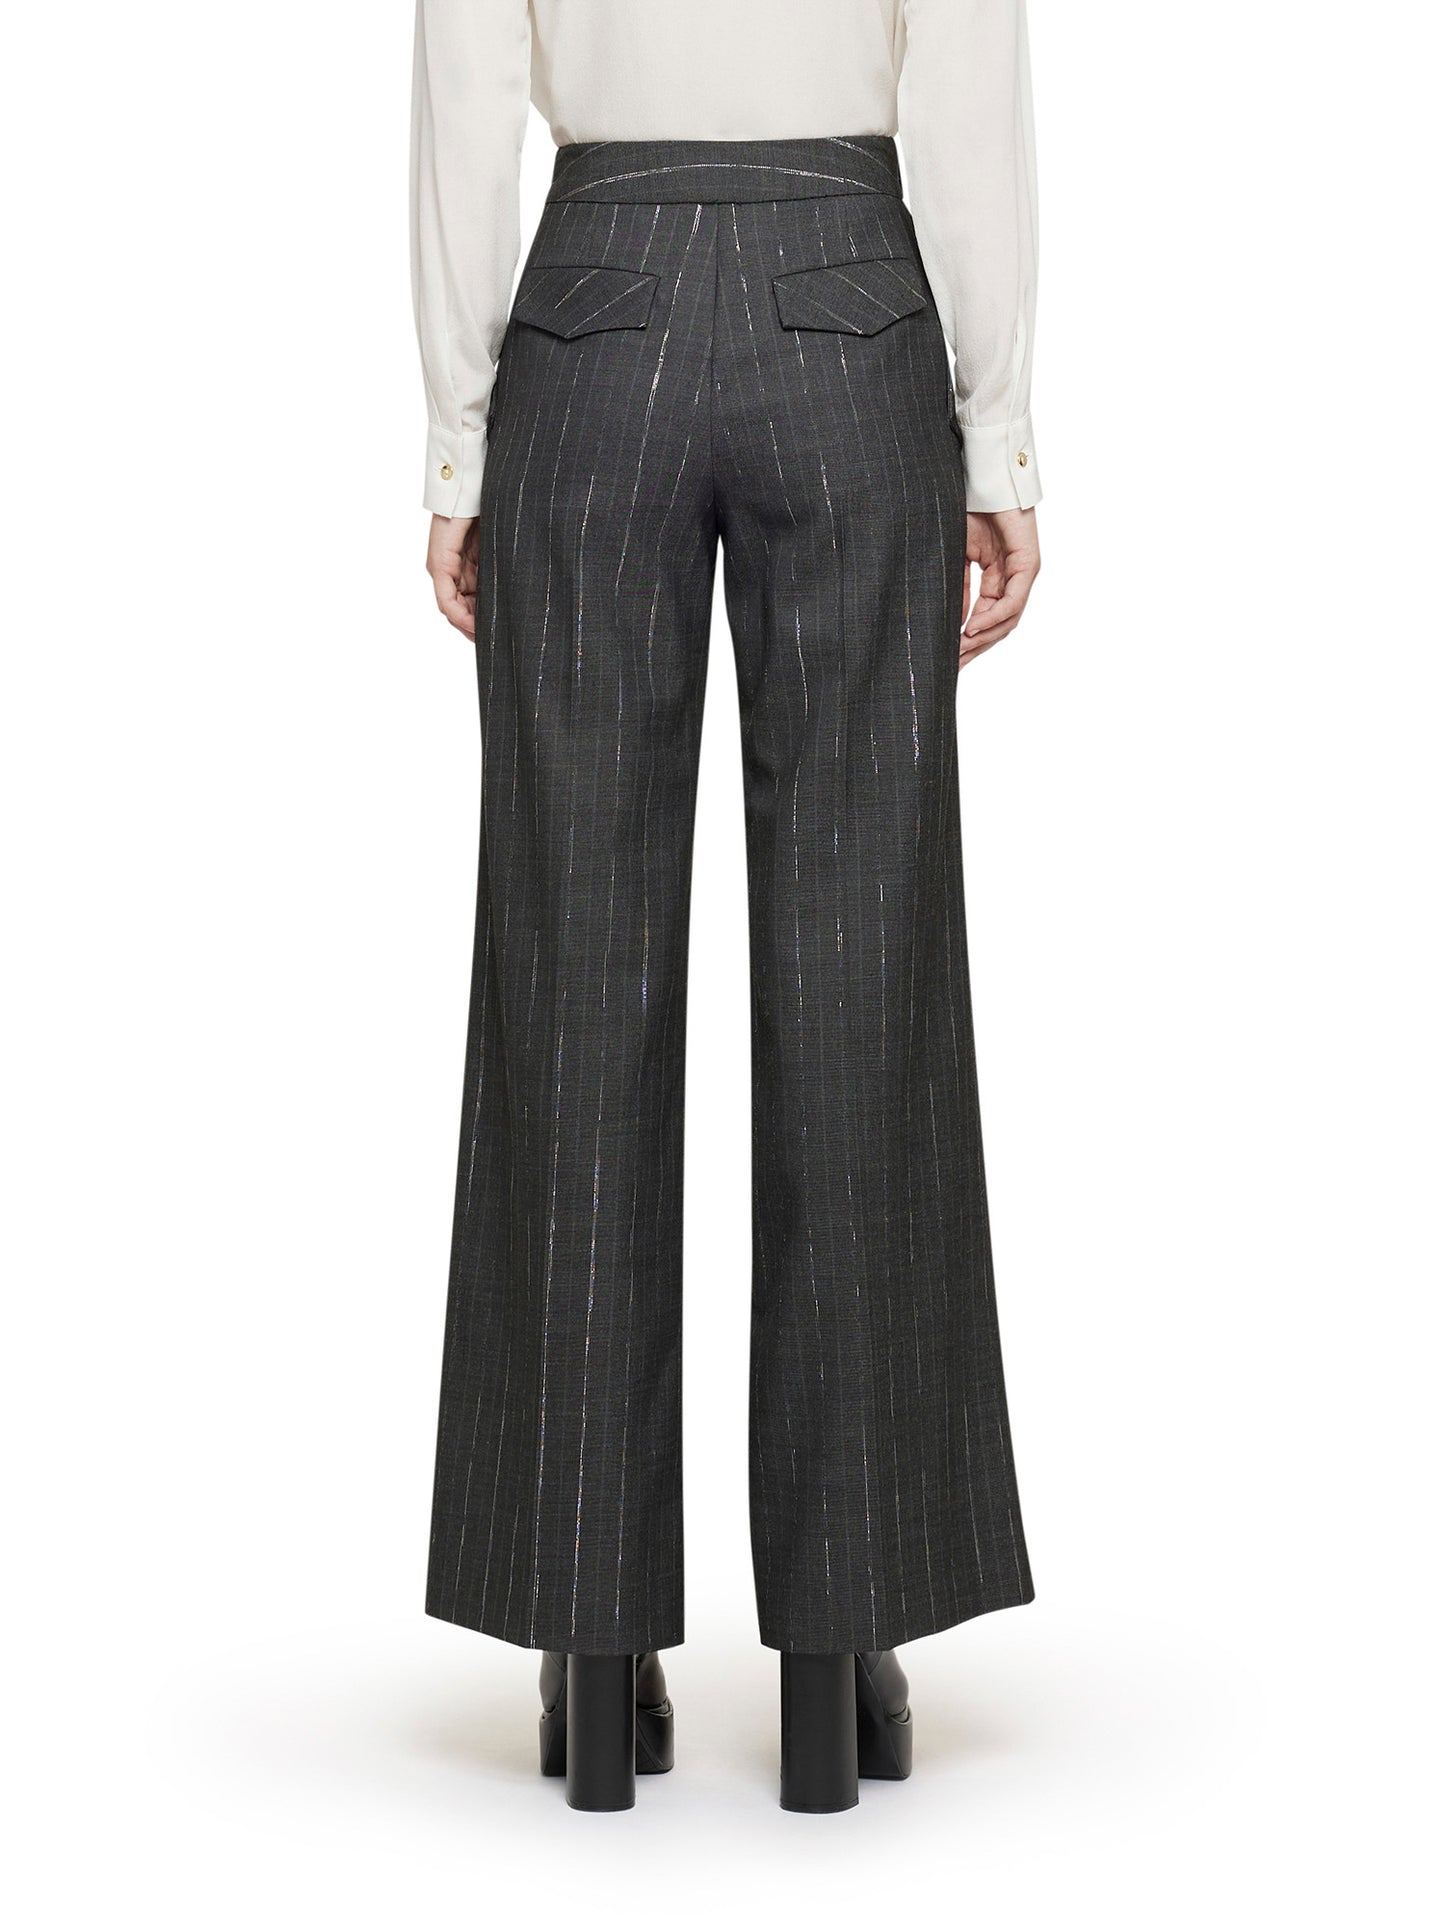 Palazzo trousers in translucent pinstripe with smoked button motif